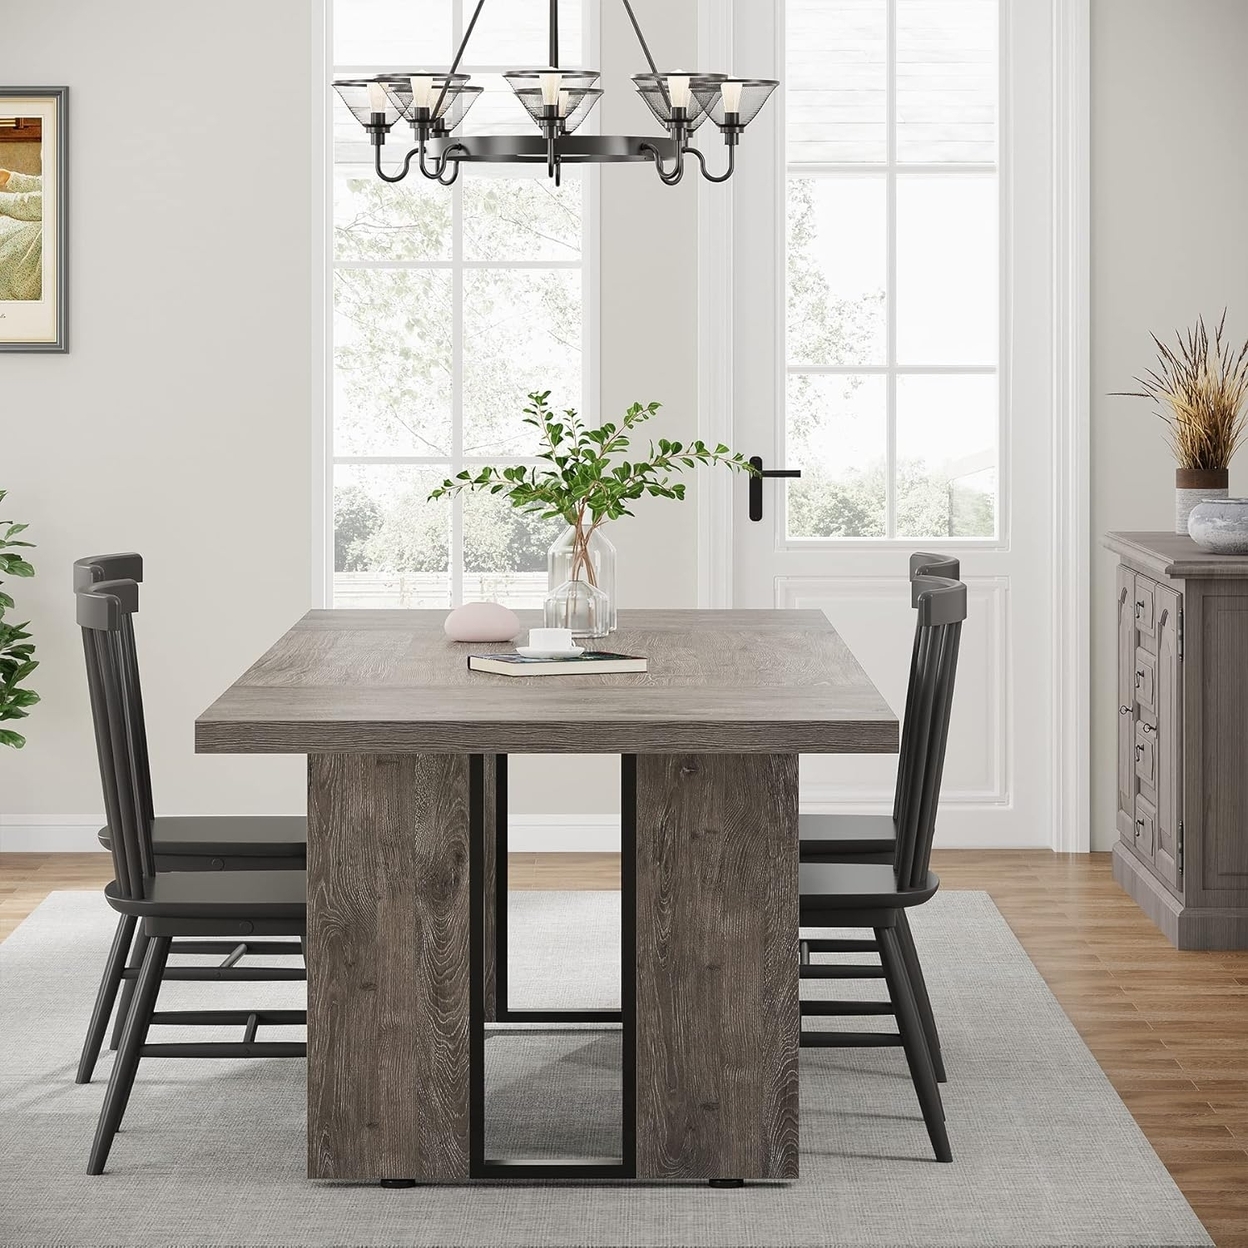 Tribesigns 71 Large Dining Table For 6 To 8 People, Rustic Farmhouse Style Dinner Table, Rectangular Dining Table - Grey